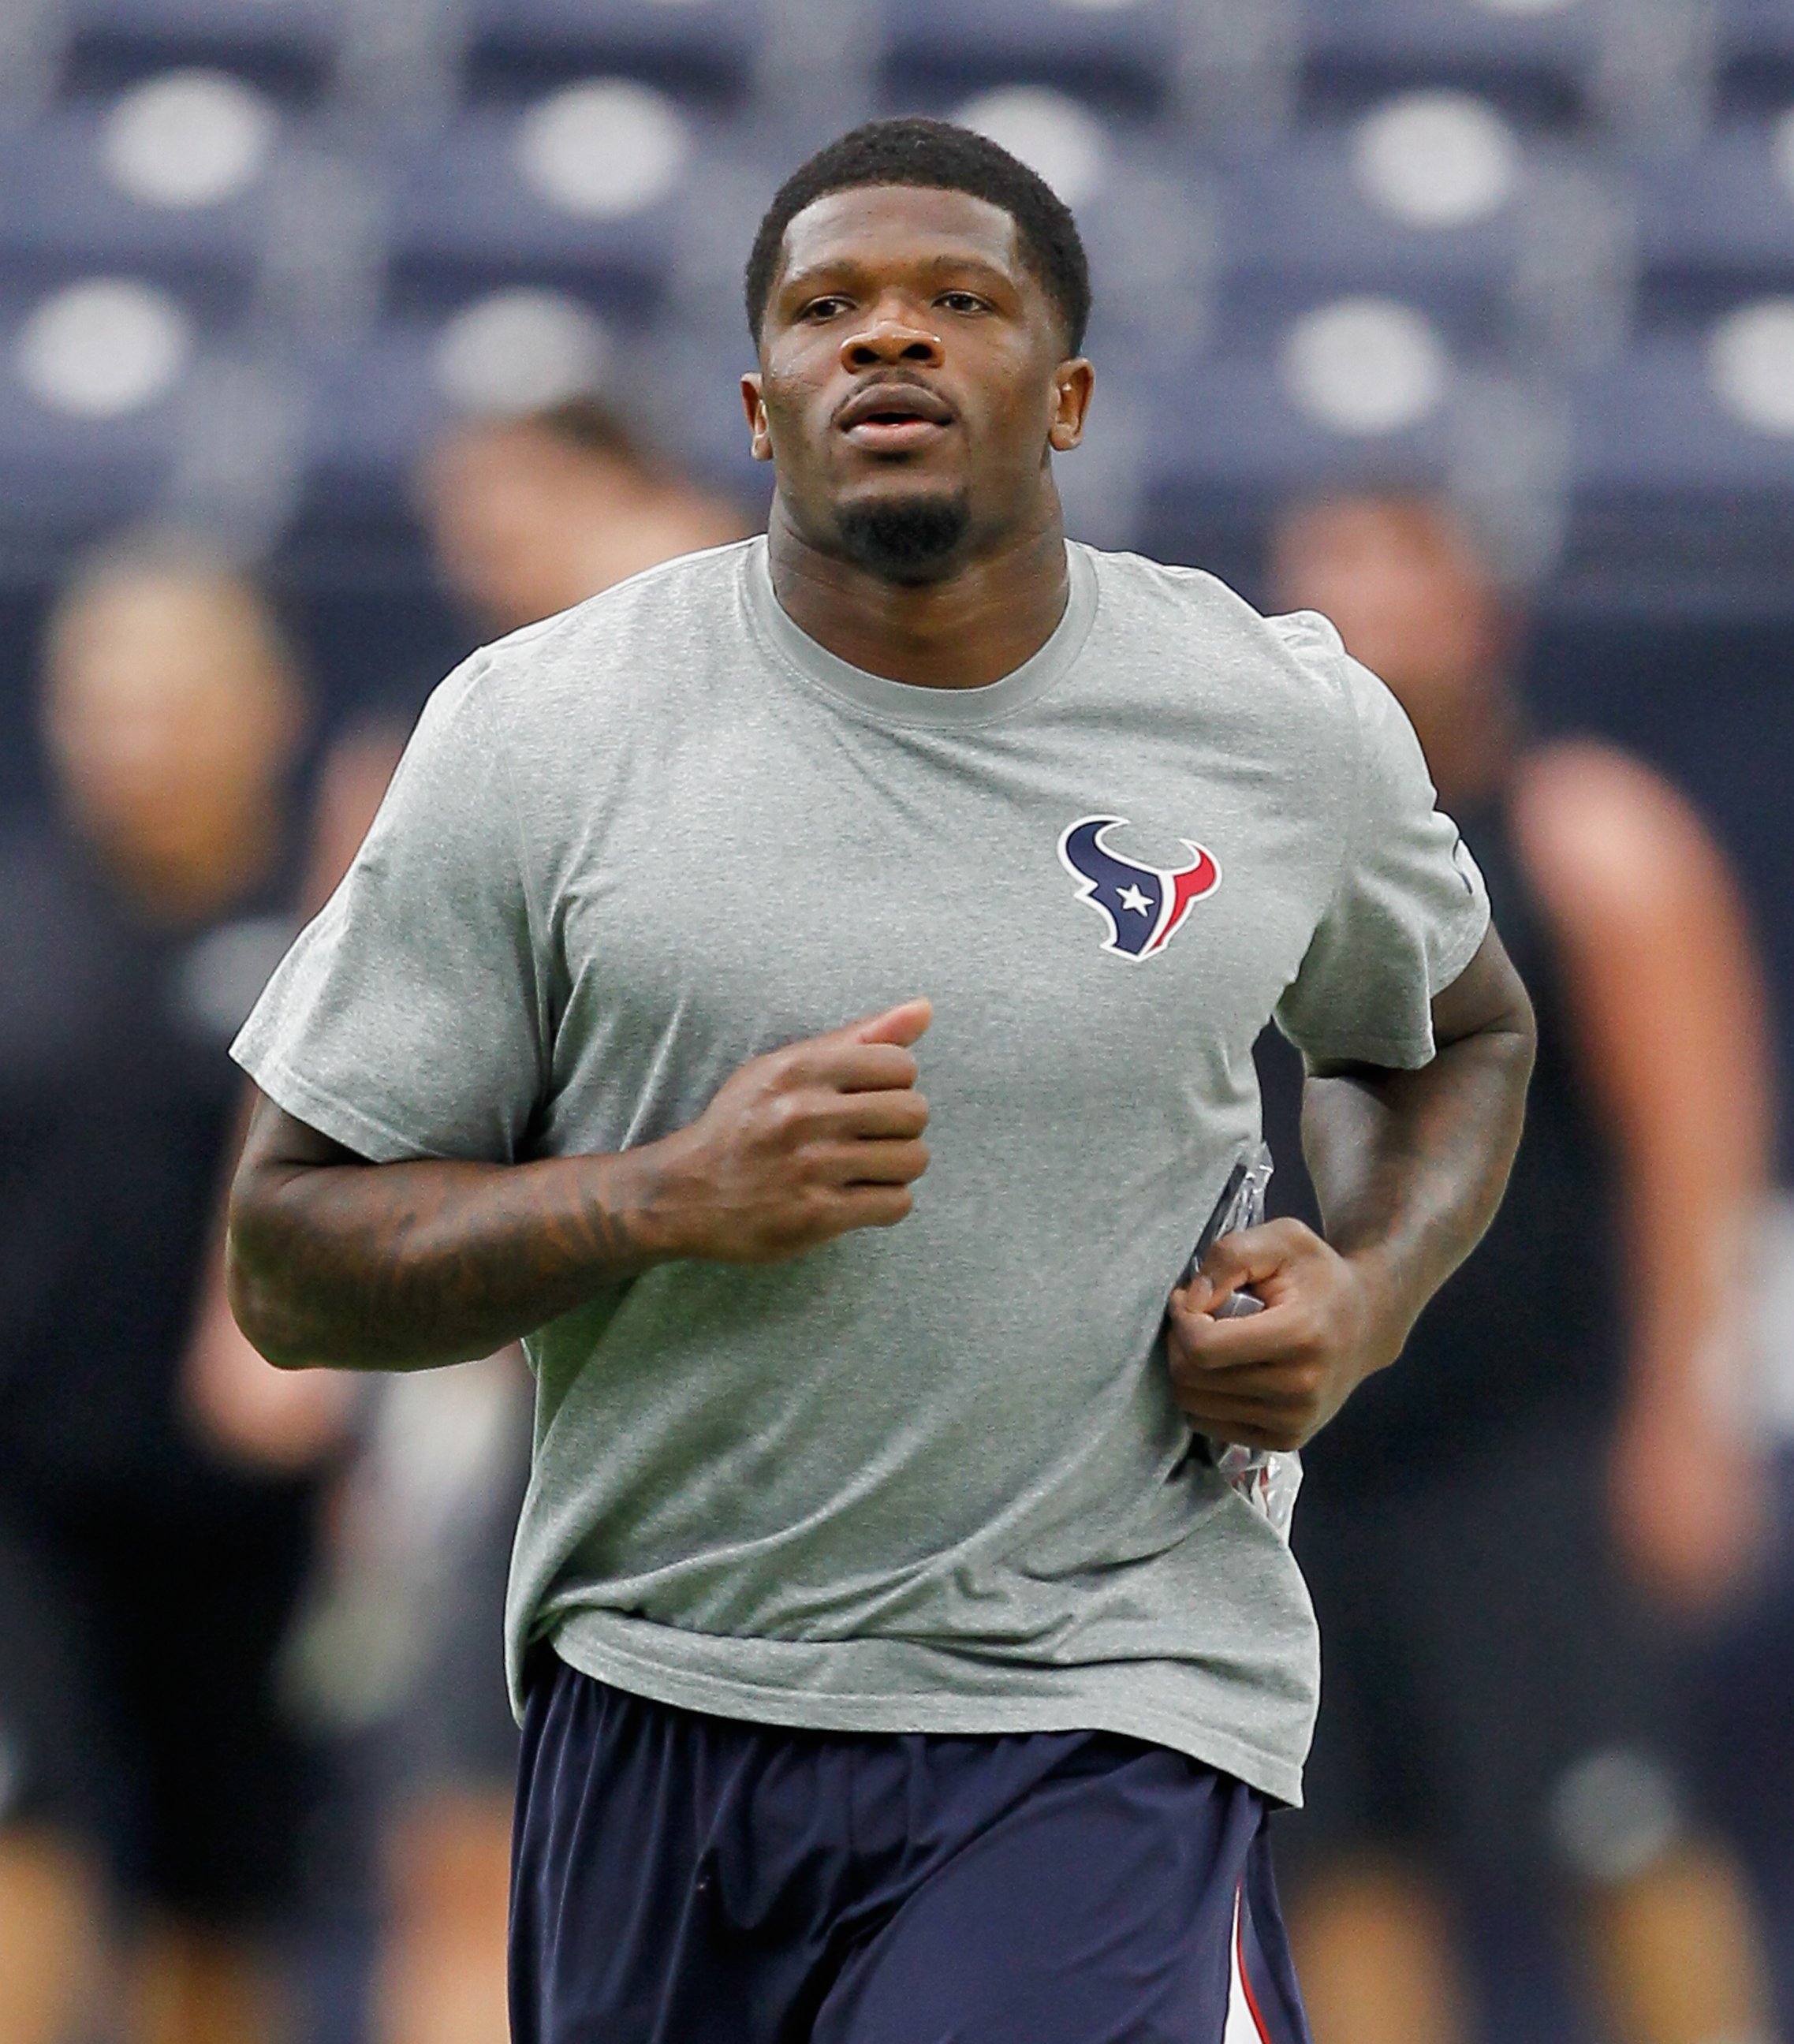 PHOTO: Andre Johnson of the Houston Texans is seen in this Nov. 2, 2014 file photo before a game against the Philadelphia Eagles in Houston, Texas.